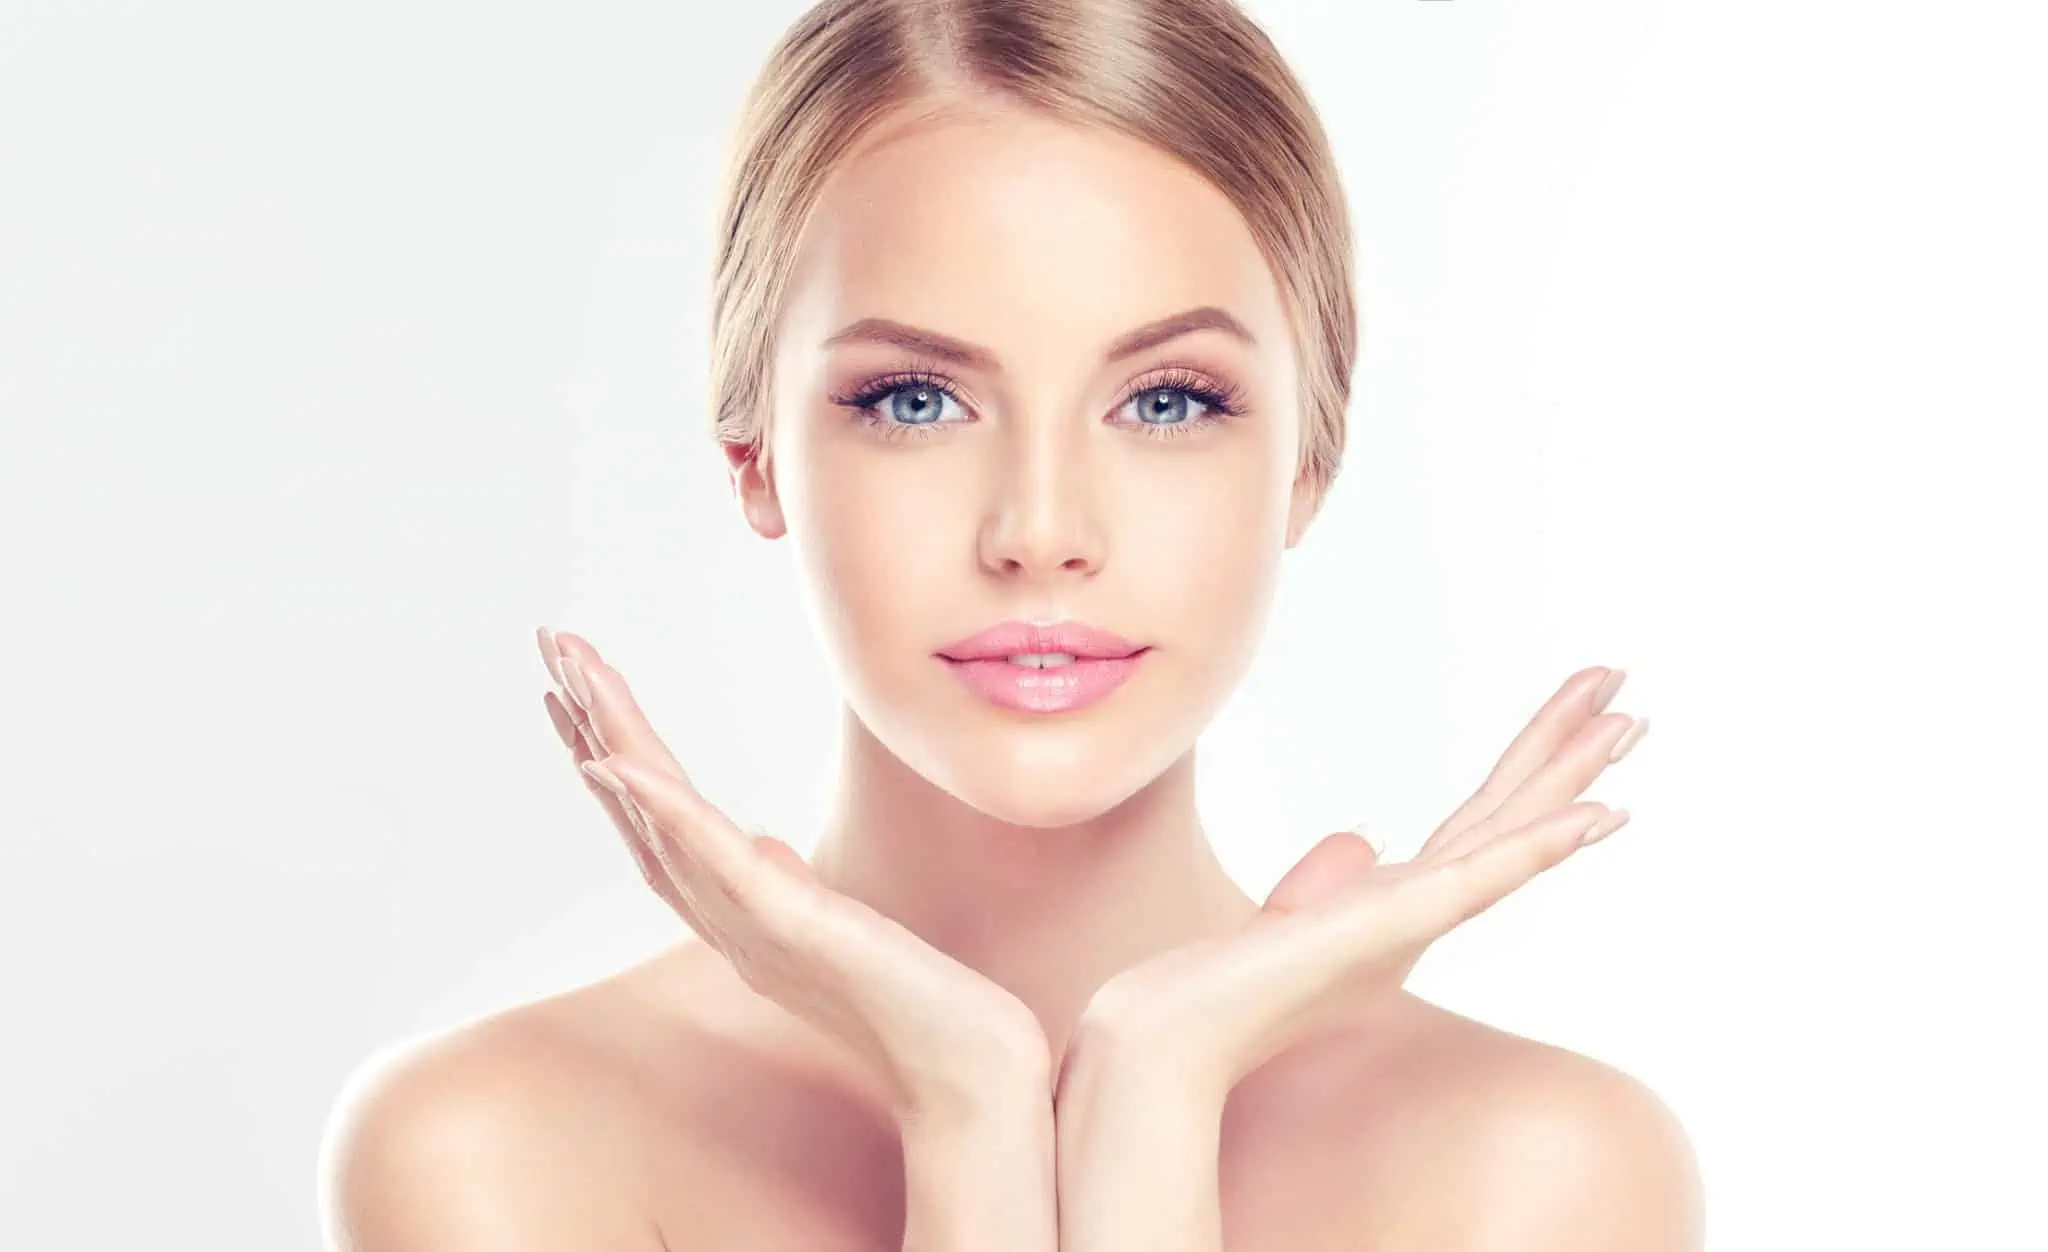 questions about kybella